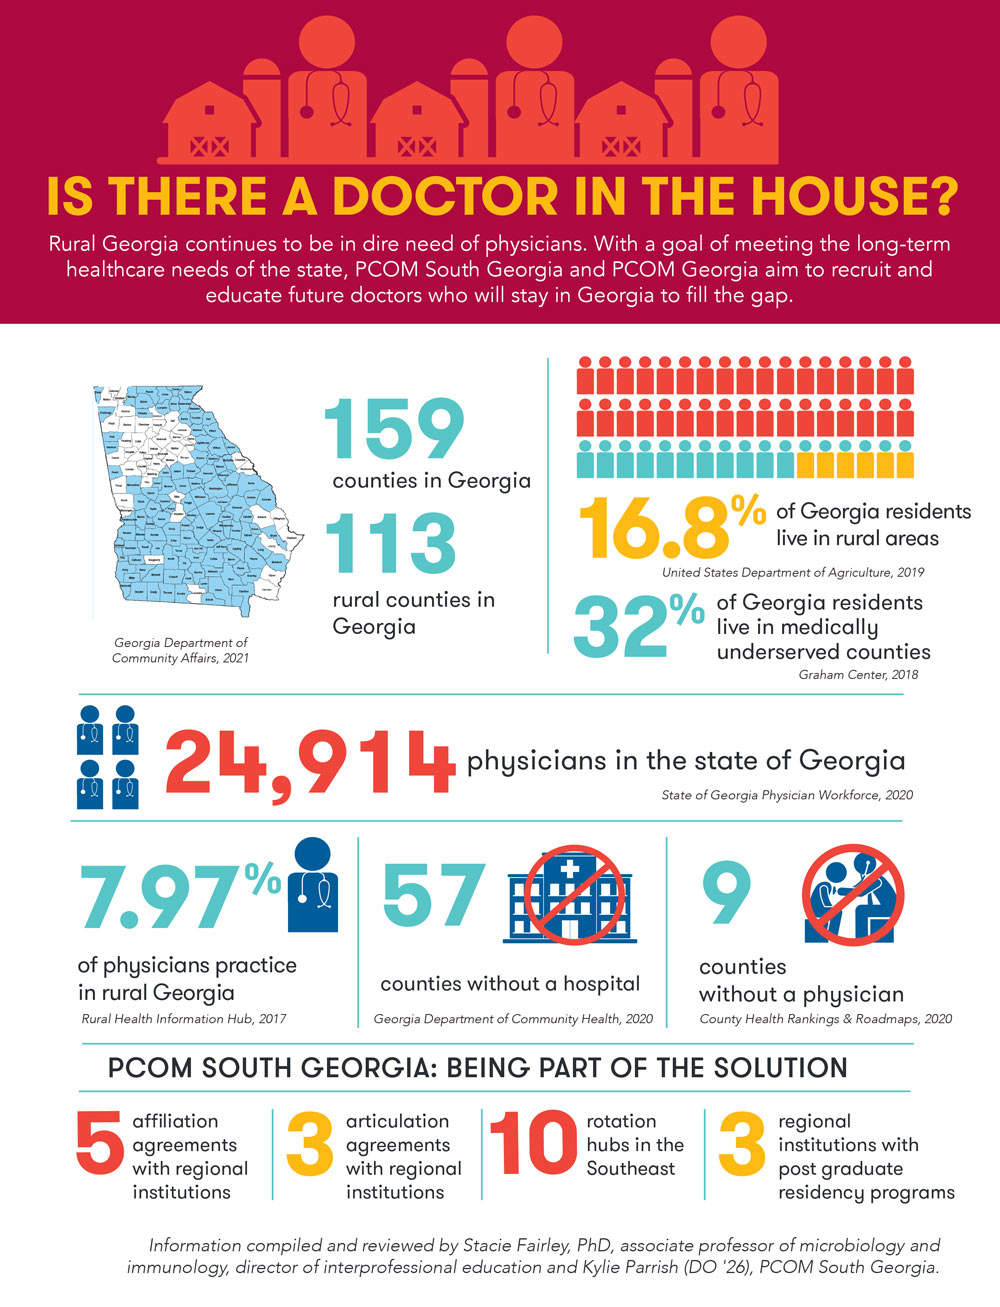 Infographic showing text and icons related to the low number of Georgia physicians practicing in rural areas